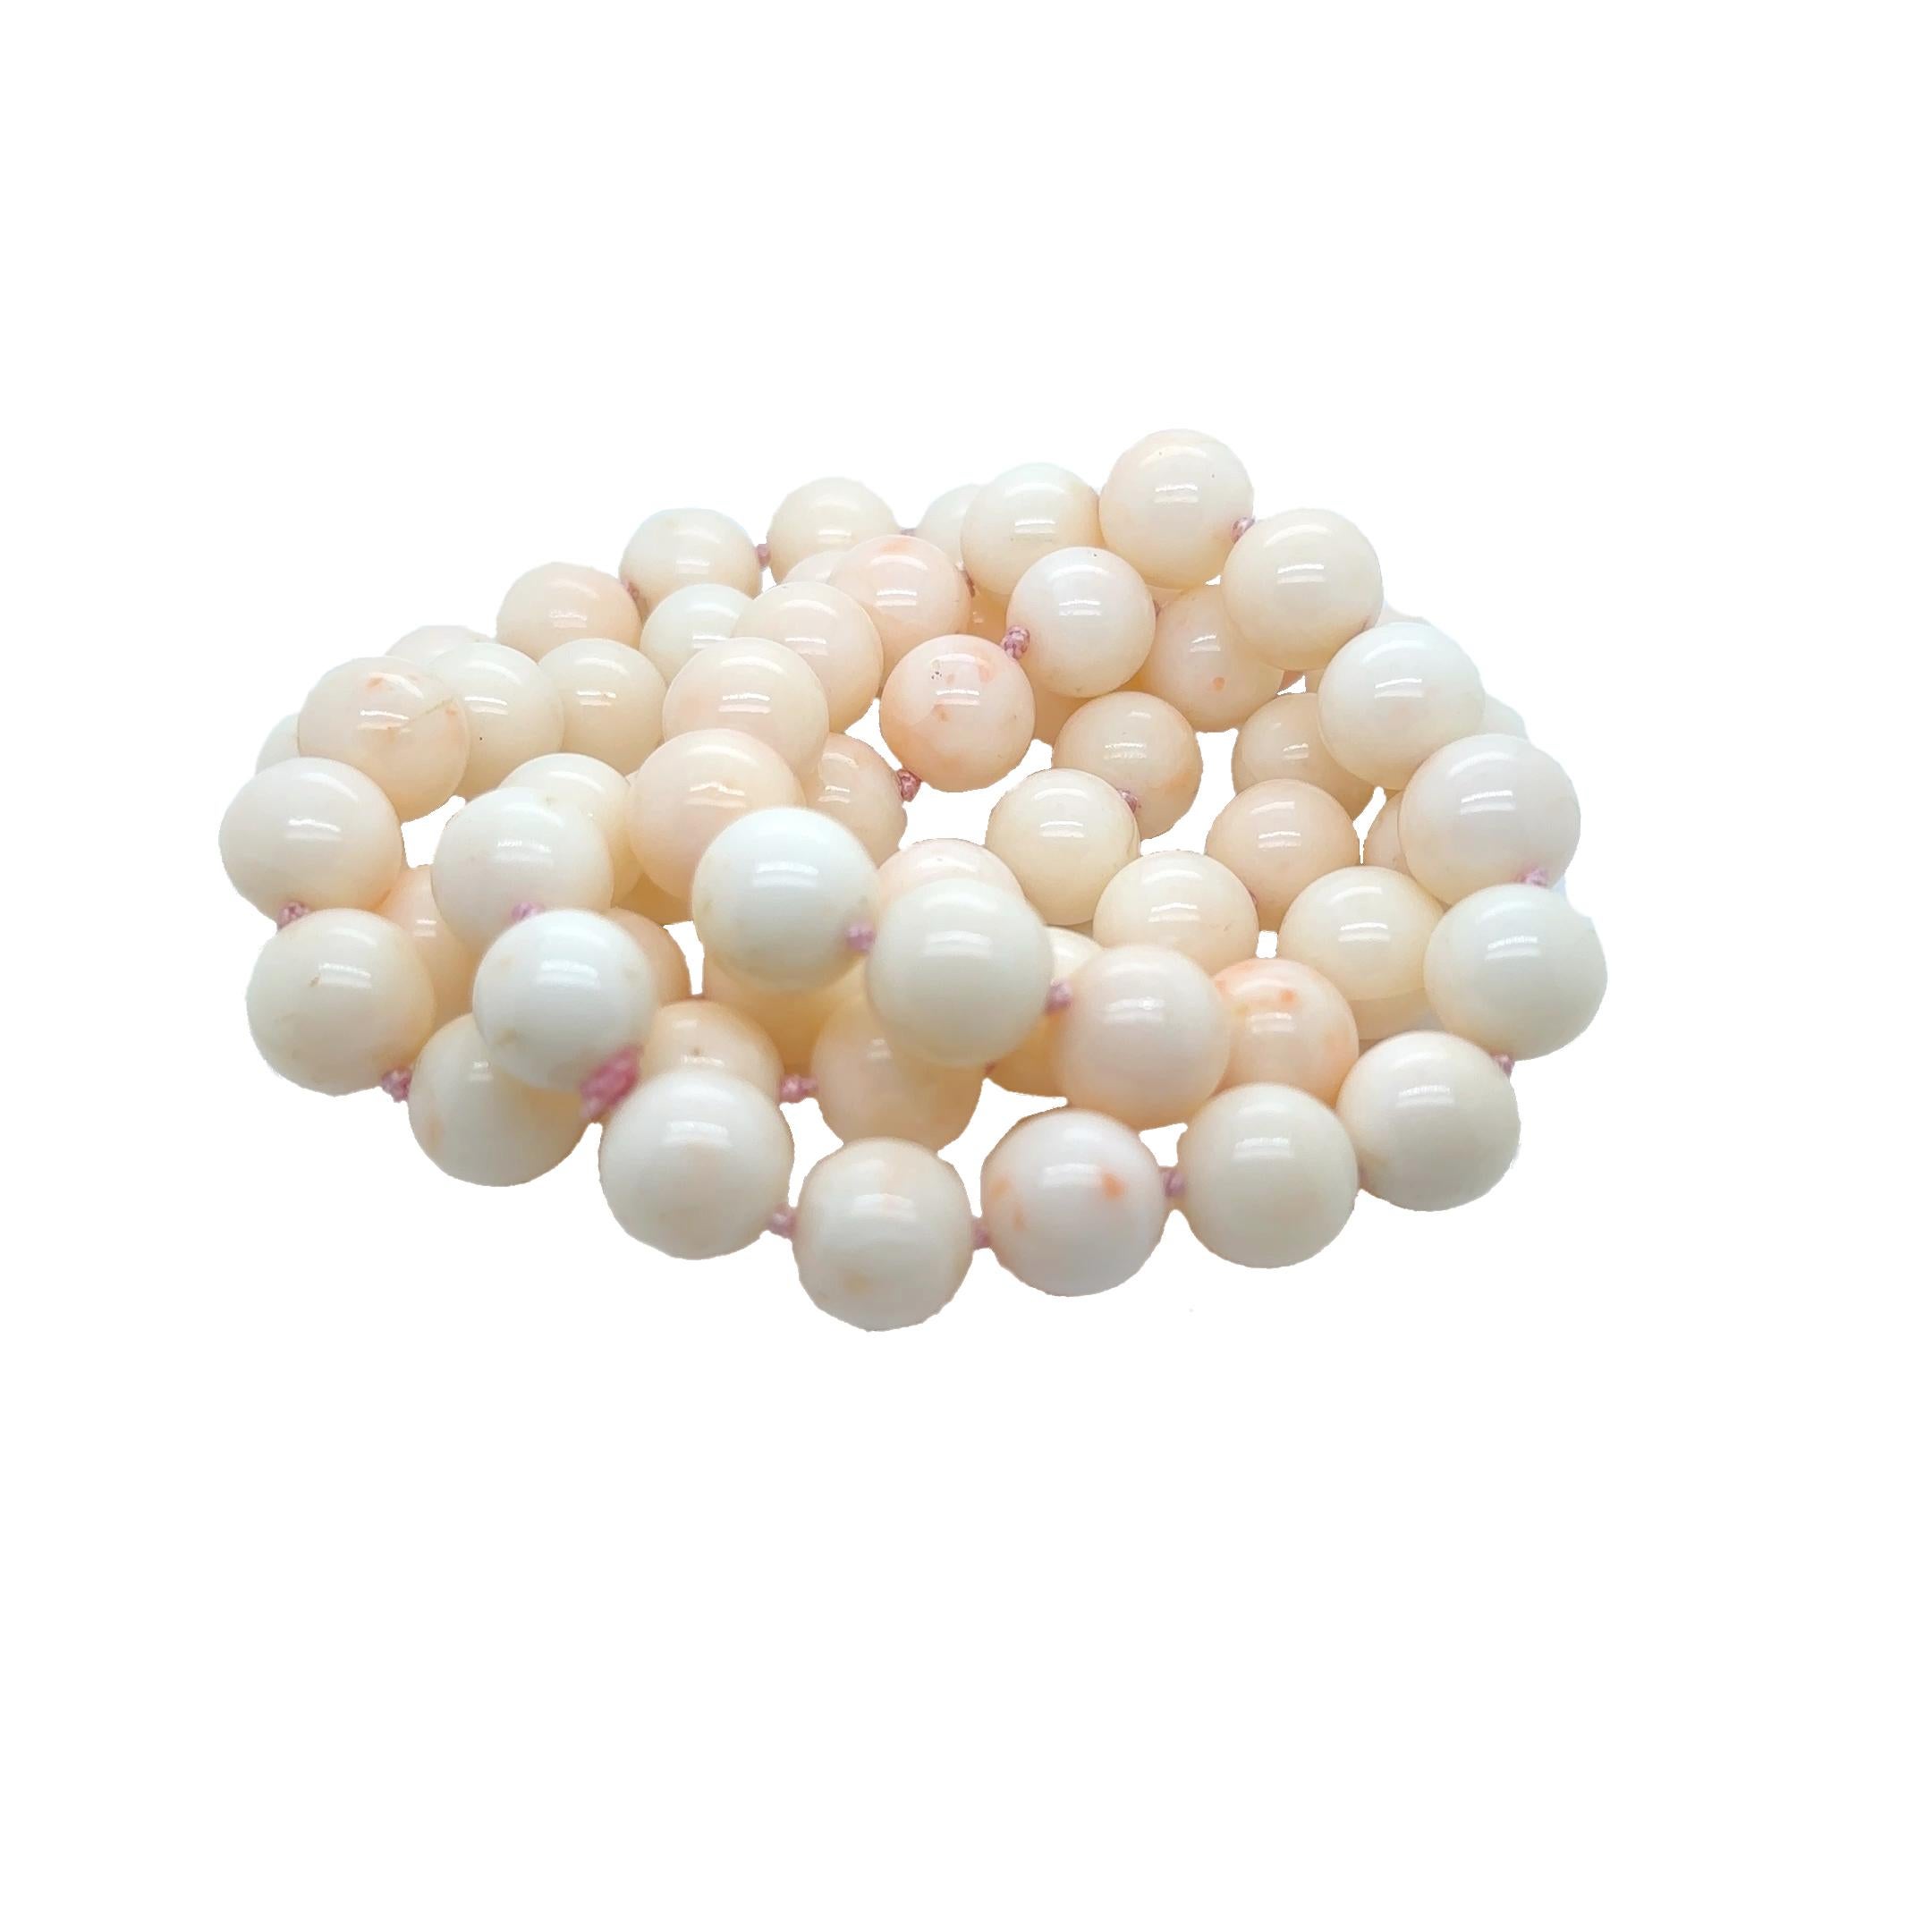 VERY RARE- Gorgeous high quality, vintage Japanese angel skin coral 32-inch continuous hand knotted necklace with 62 beautiful, extra-large l 12.5 MM round beads in the same size and very uniform in shape, color and luster.  The exquisite beads are